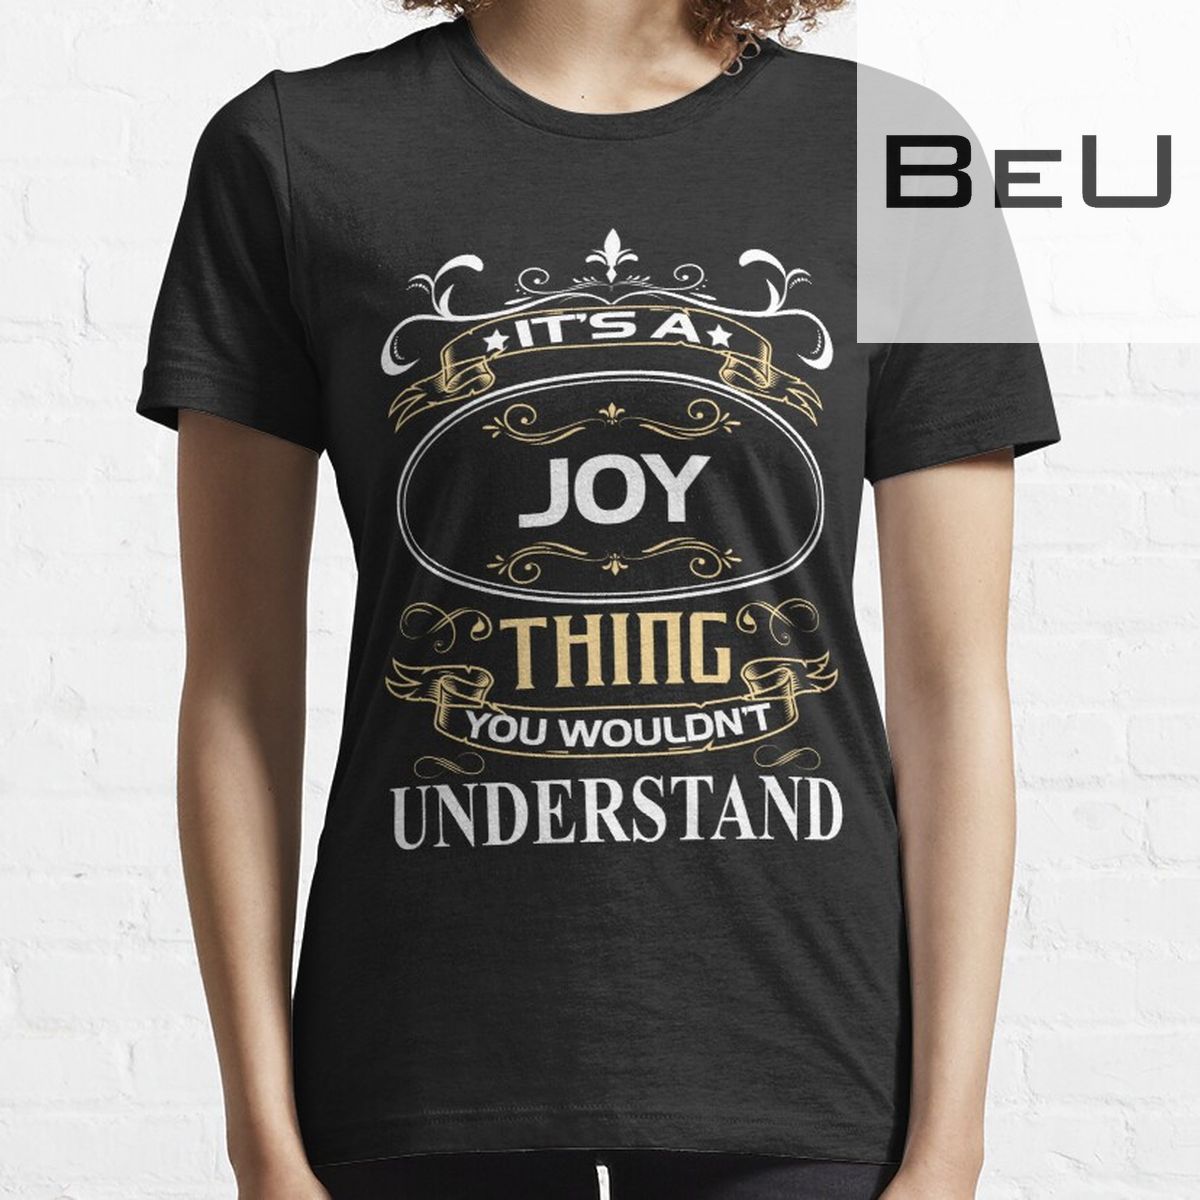 Joy Name Shirt It's A Joy Thing You Wouldn't Understand T-shirt